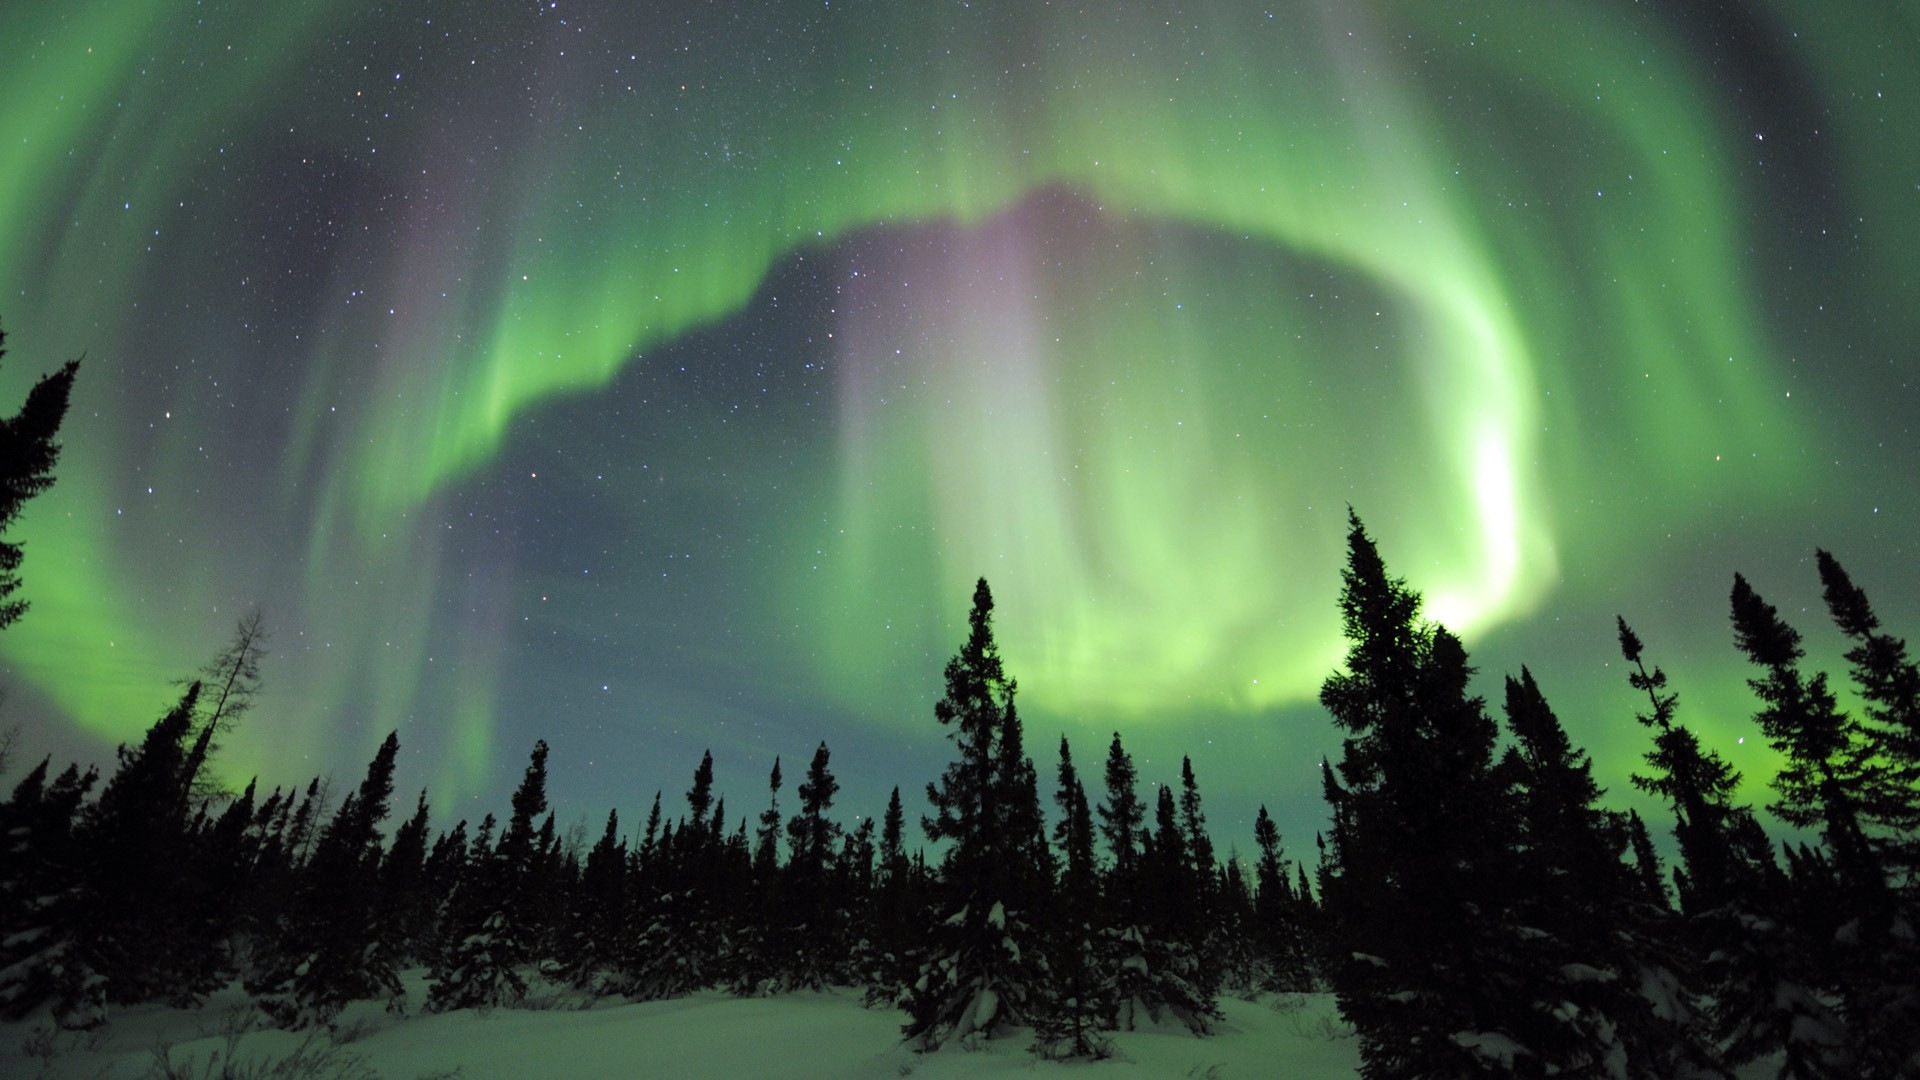 Natural wonders of the Northern Lights HD Wallpaper (2) #9 - 1920x1080